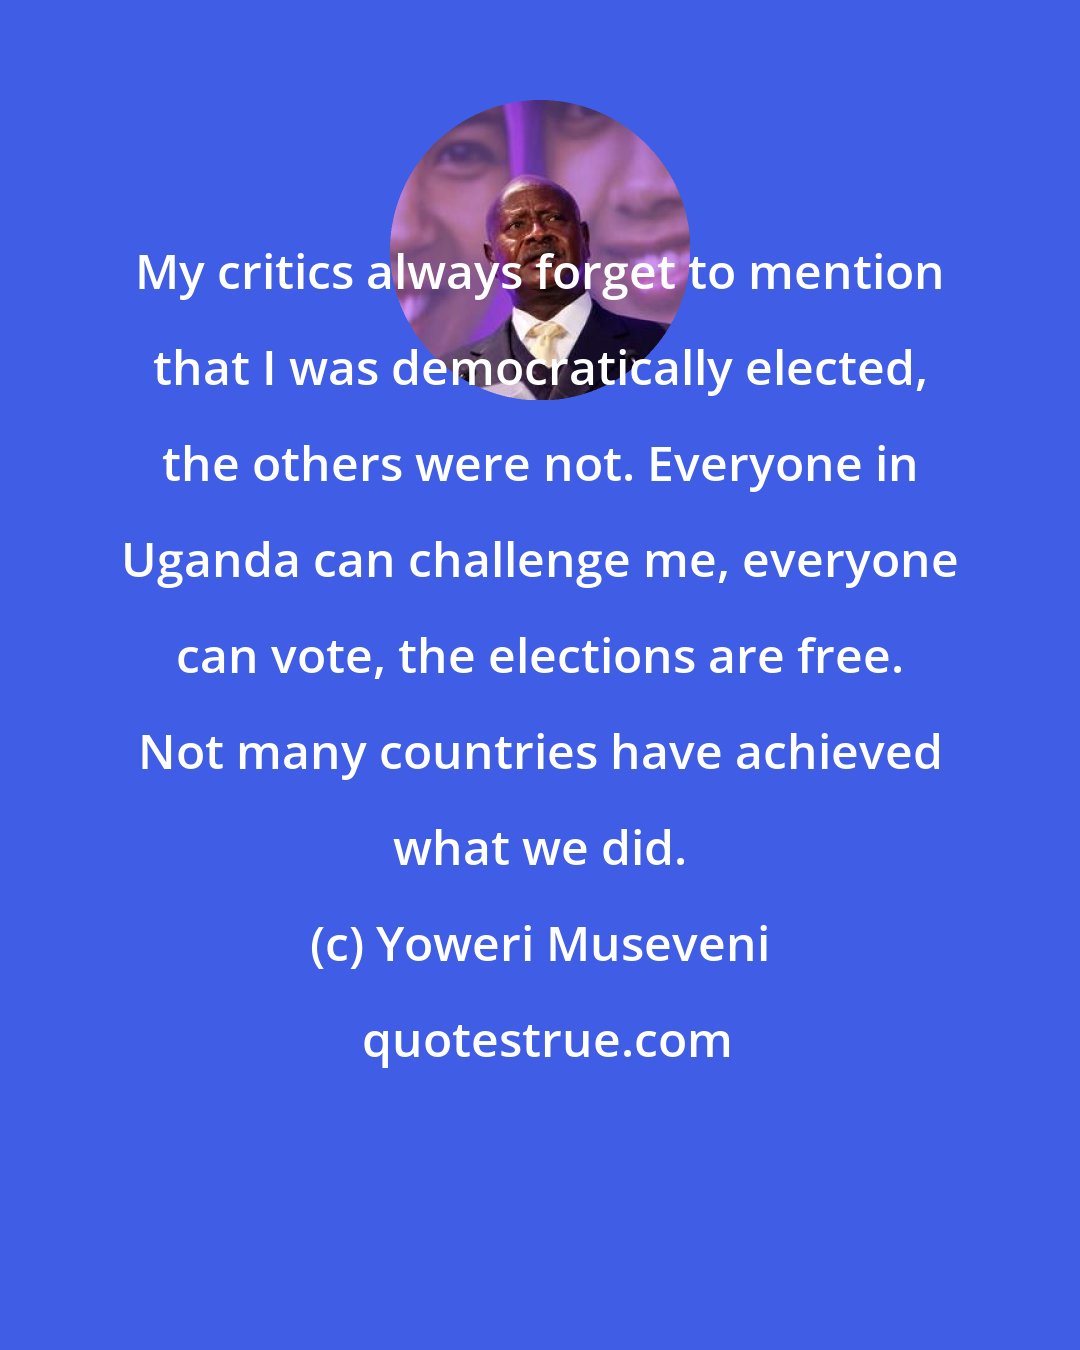 Yoweri Museveni: My critics always forget to mention that I was democratically elected, the others were not. Everyone in Uganda can challenge me, everyone can vote, the elections are free. Not many countries have achieved what we did.